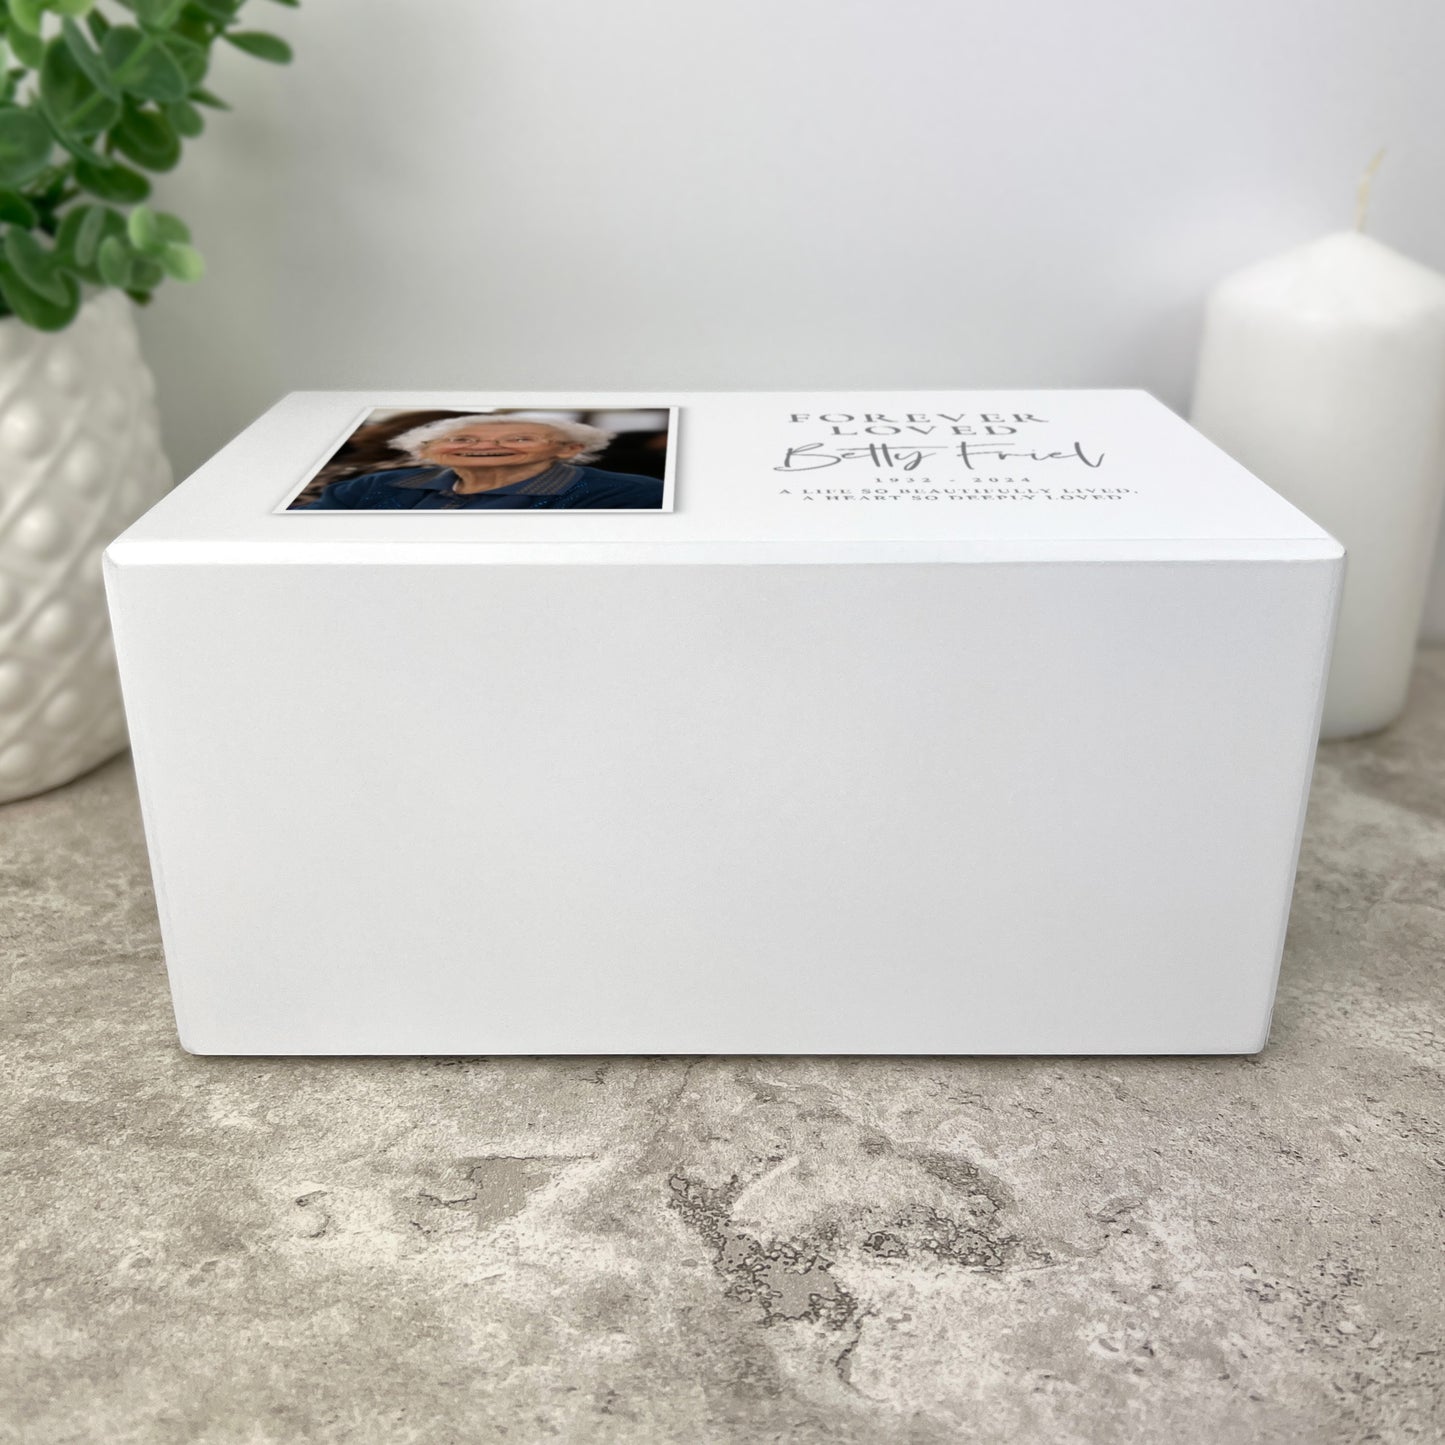 Personalised Forever Loved Photo Large Cremation Urn For Ashes | 1.44 Litres